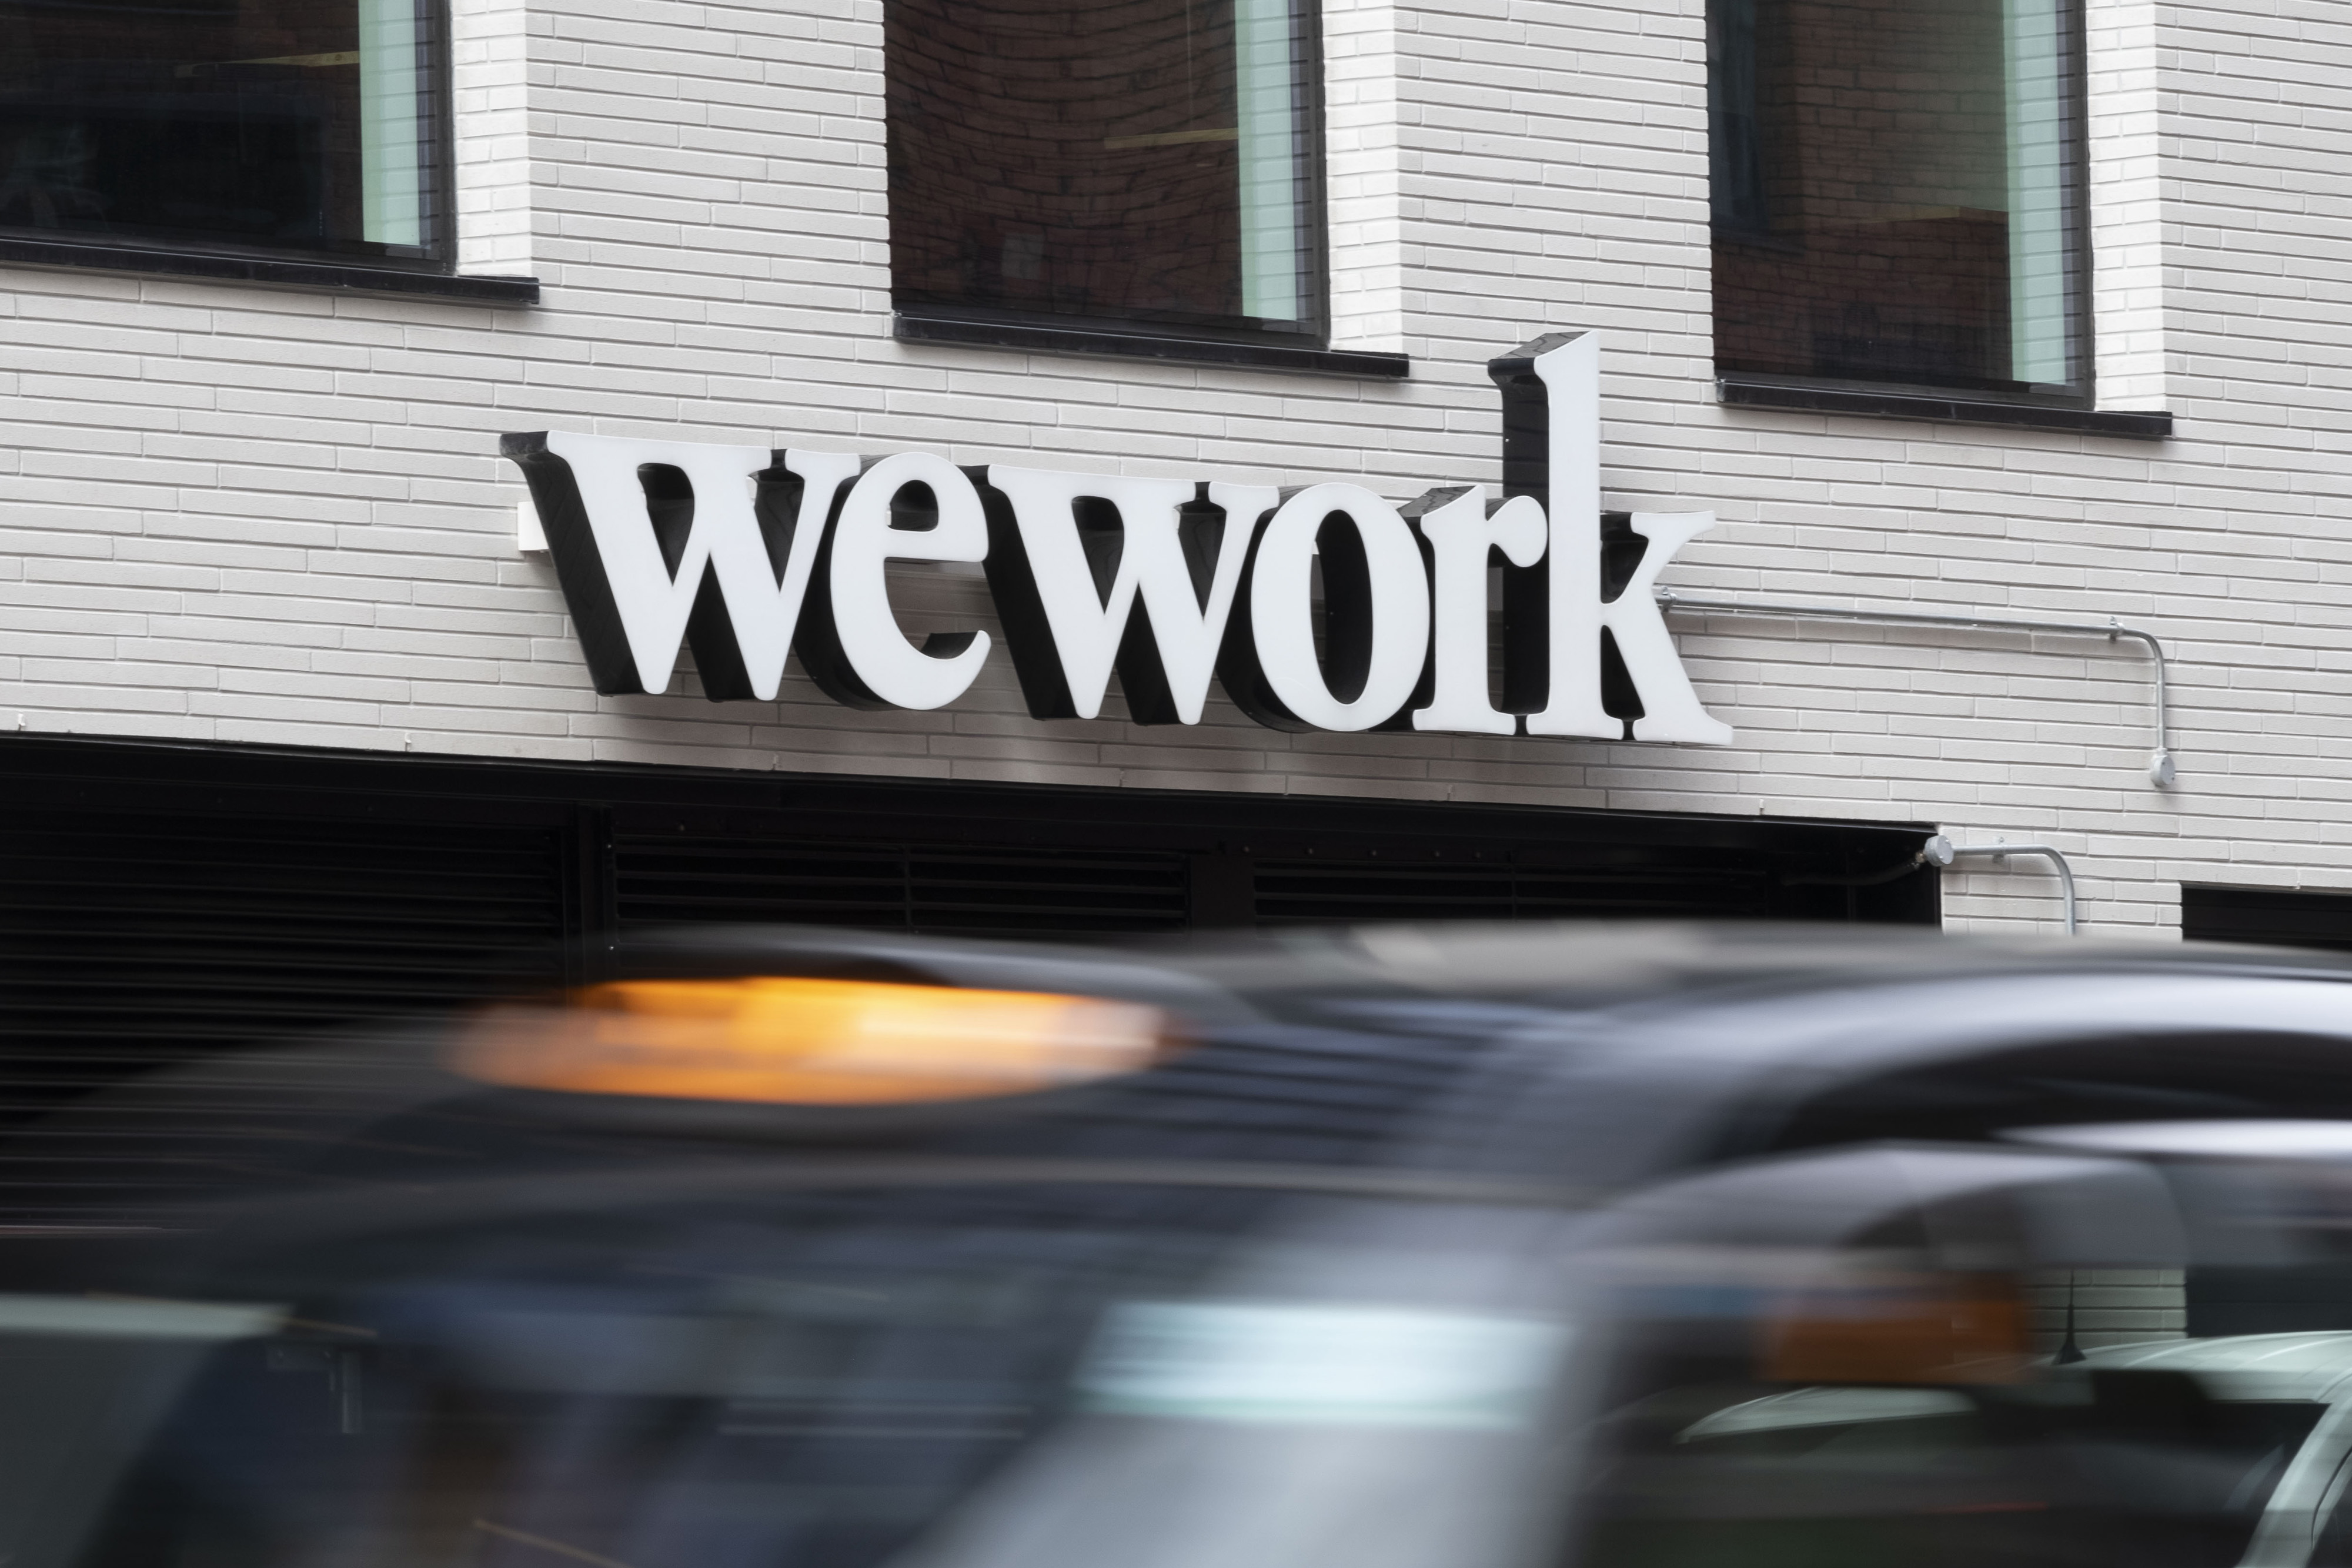 A taxi drives past a logo for WeWork in London.